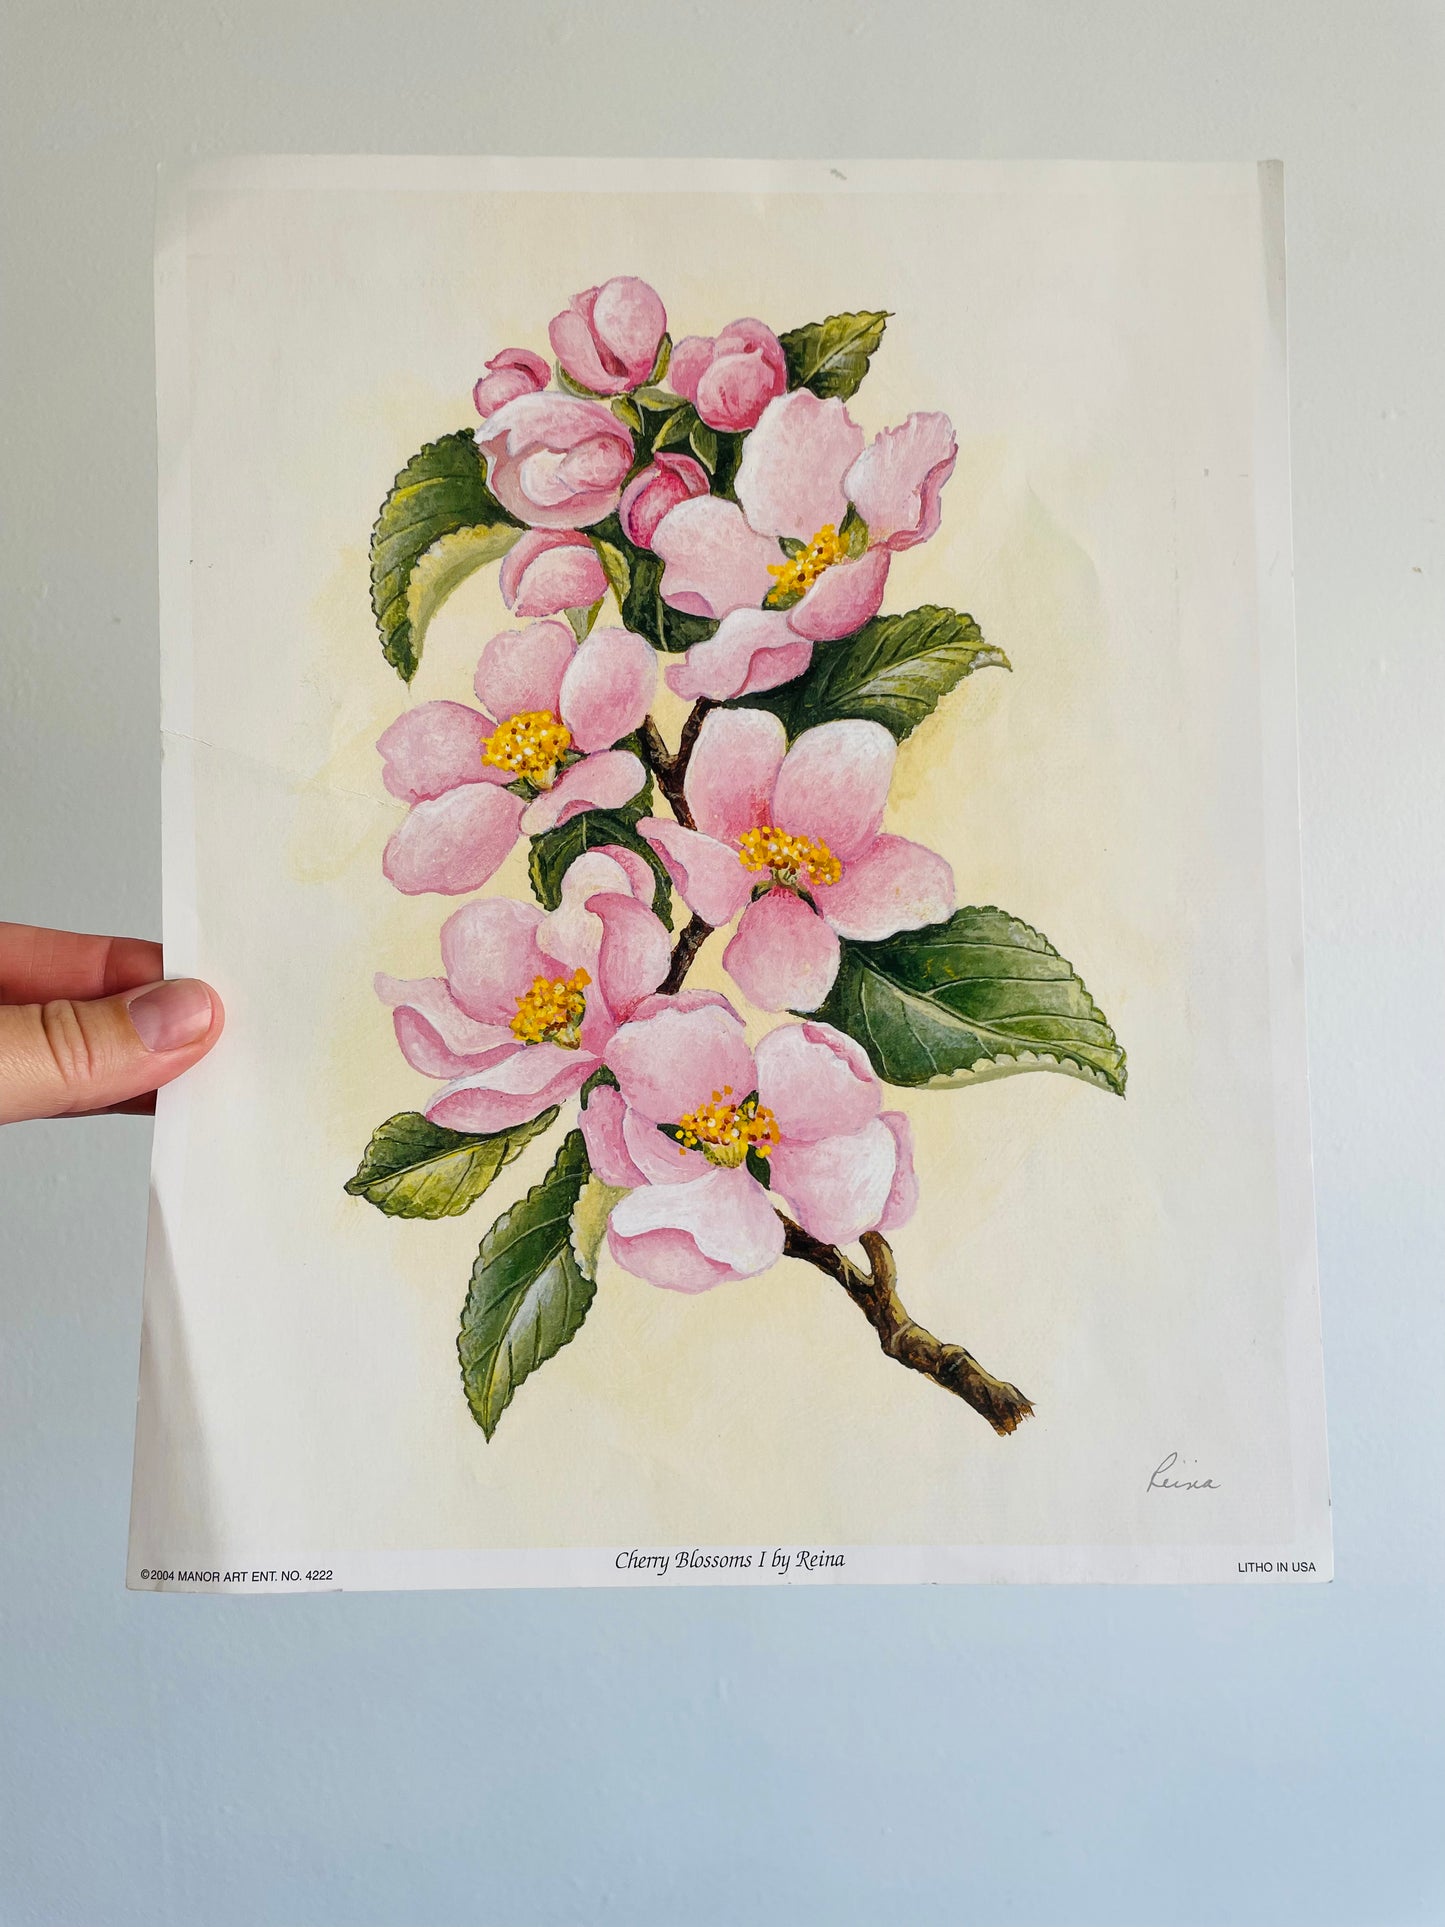 Cherry Blossoms I by Reina (2004) Manor Art  - Floral Lithograph Print Ready for Framing!